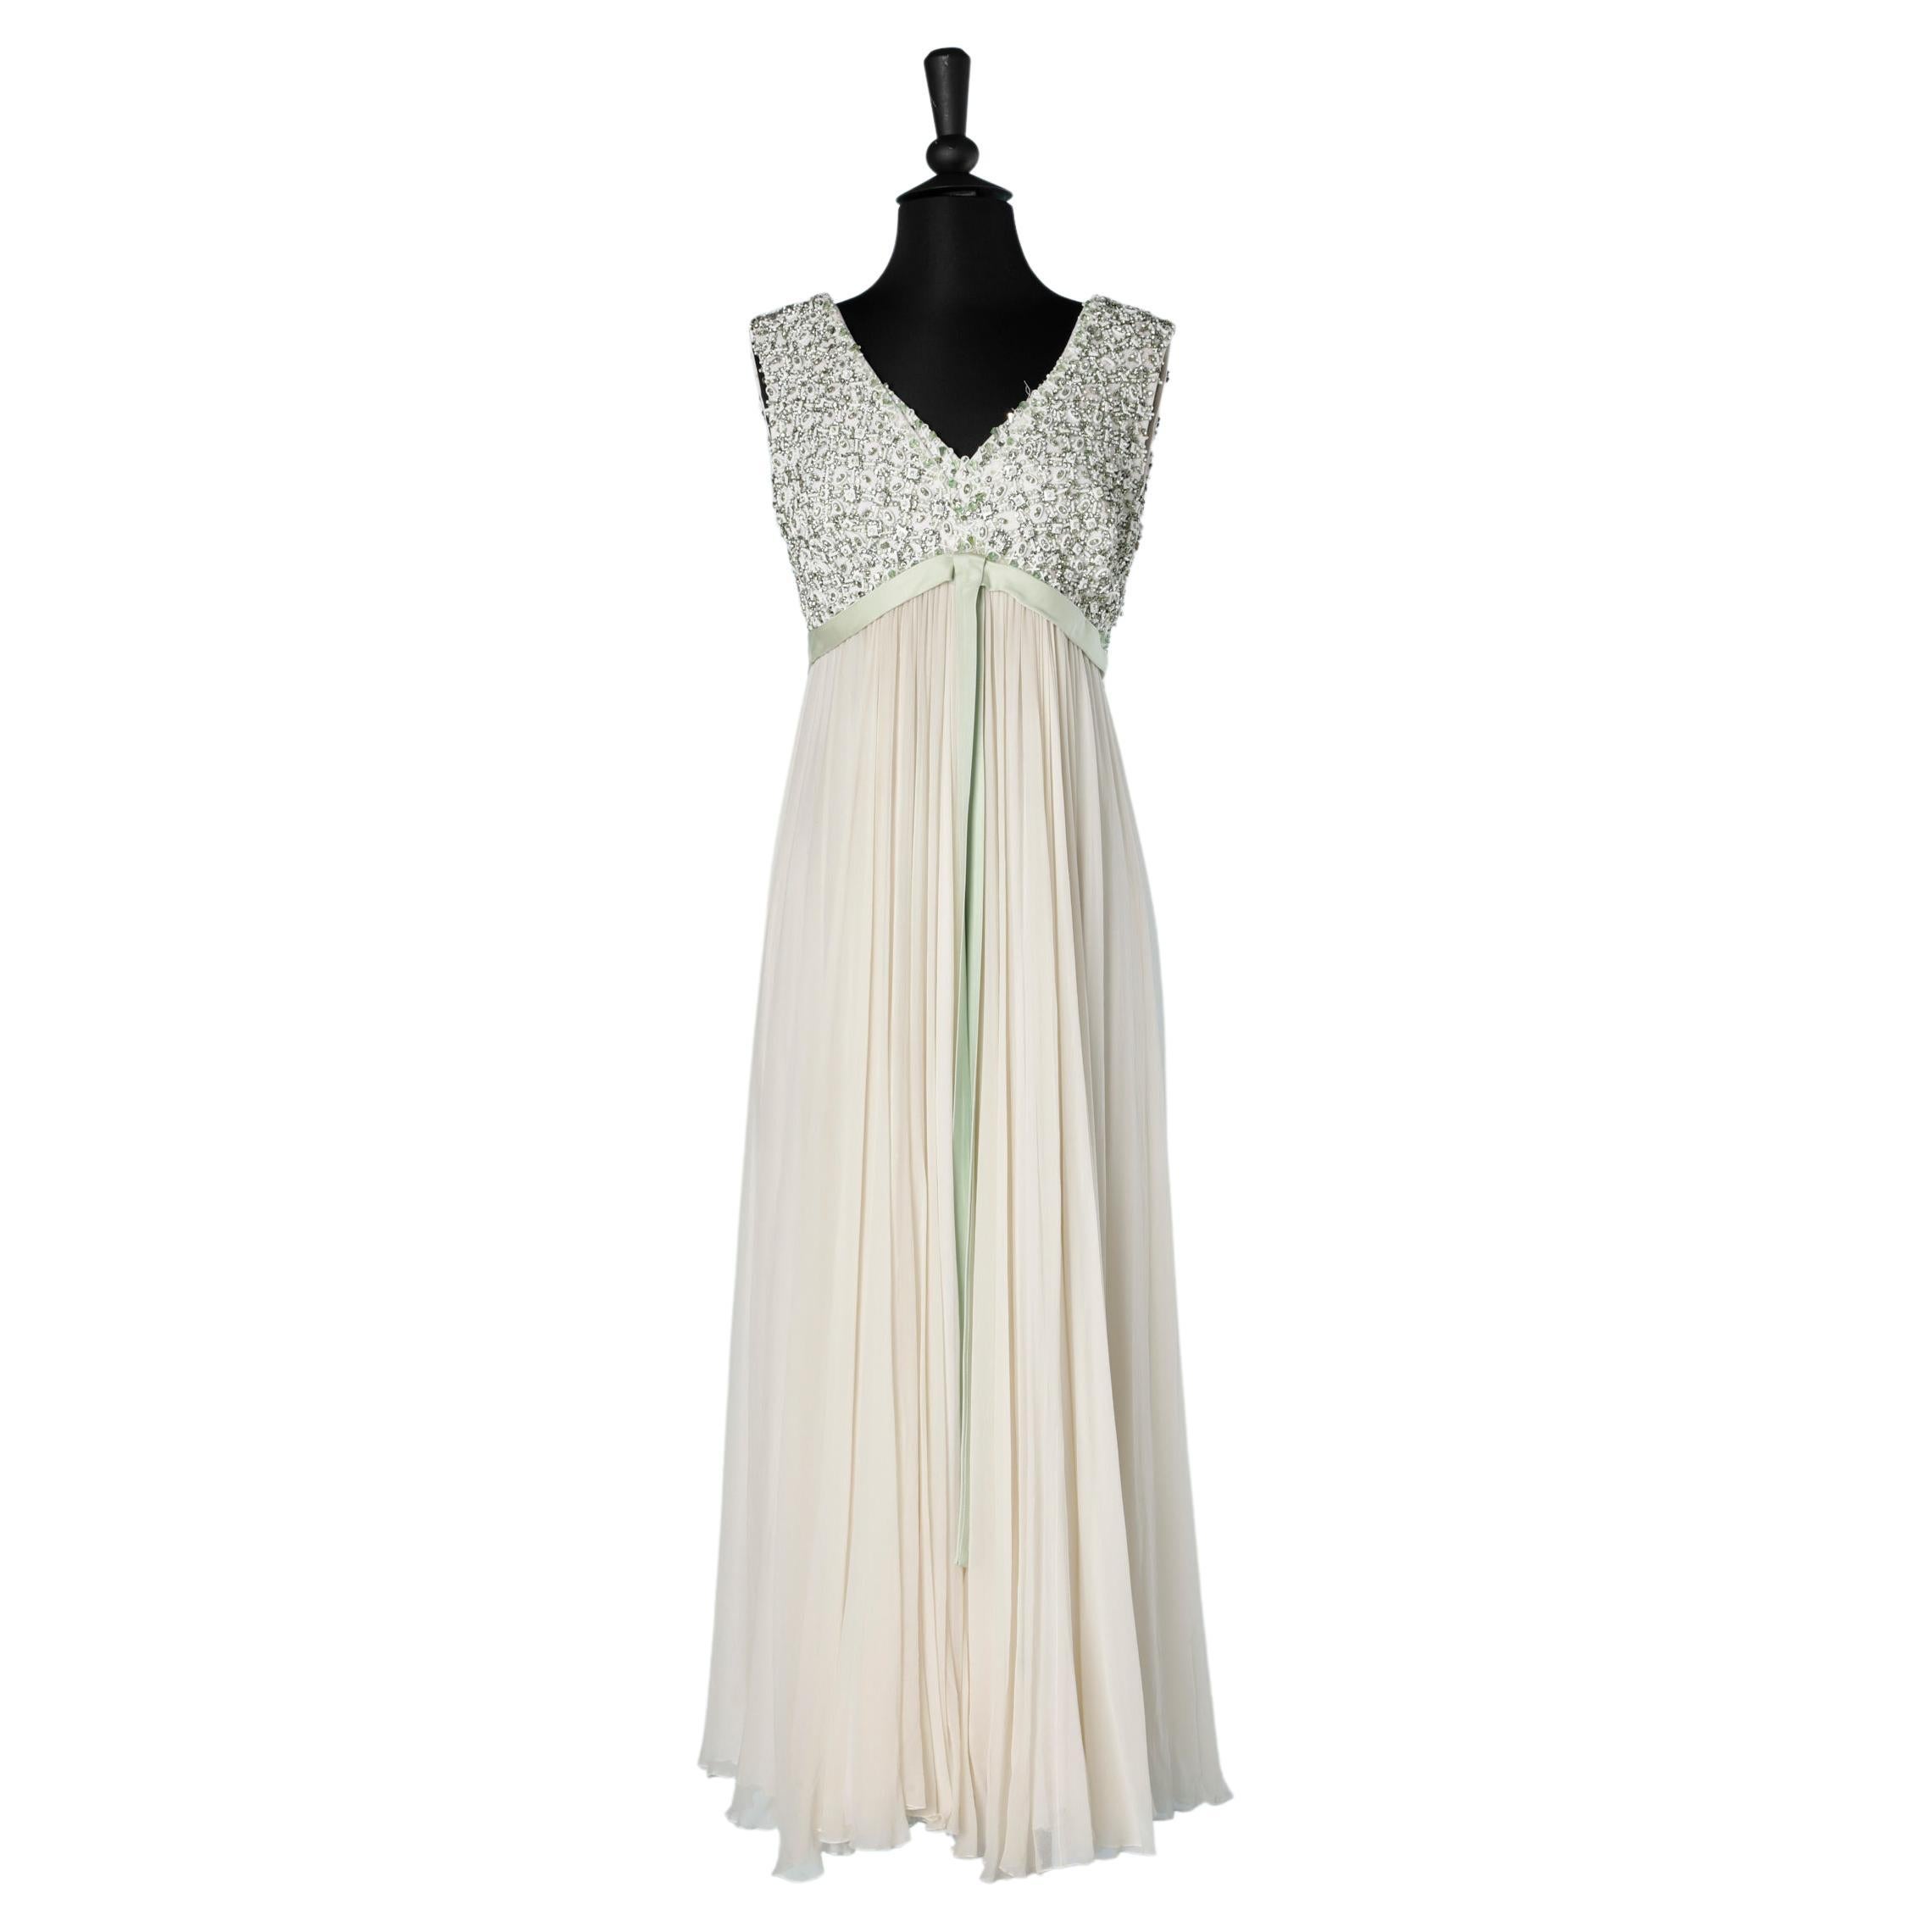 1960's evening gown embroidered top and ivory chiffon skirt